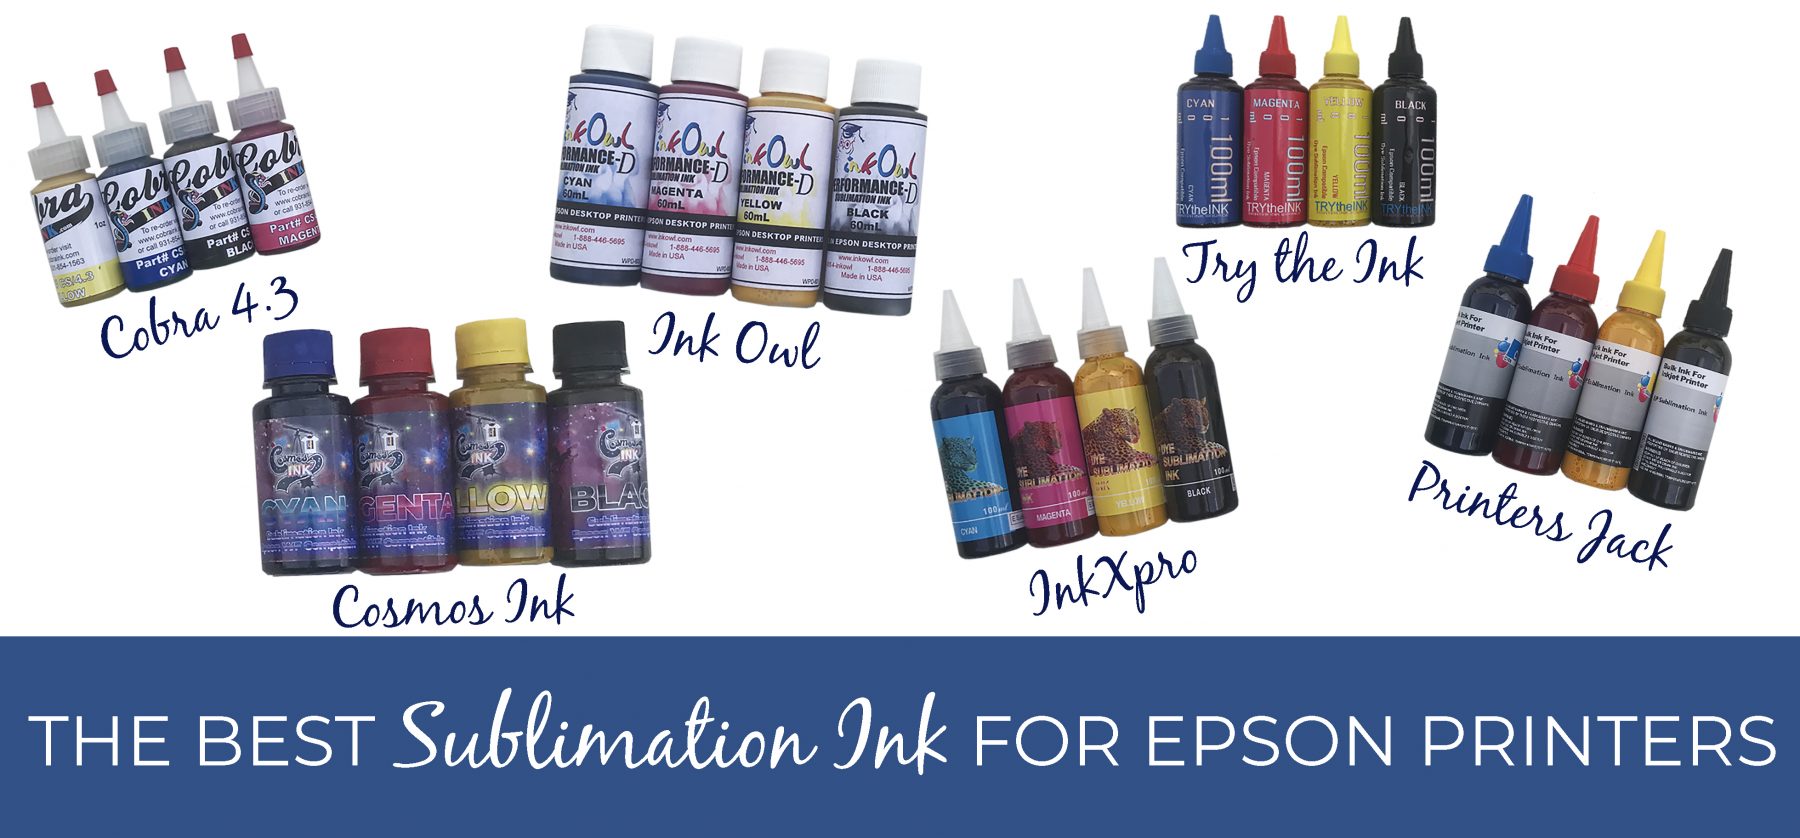 The Best Sublimation Ink for Epson Printers: A Comparison